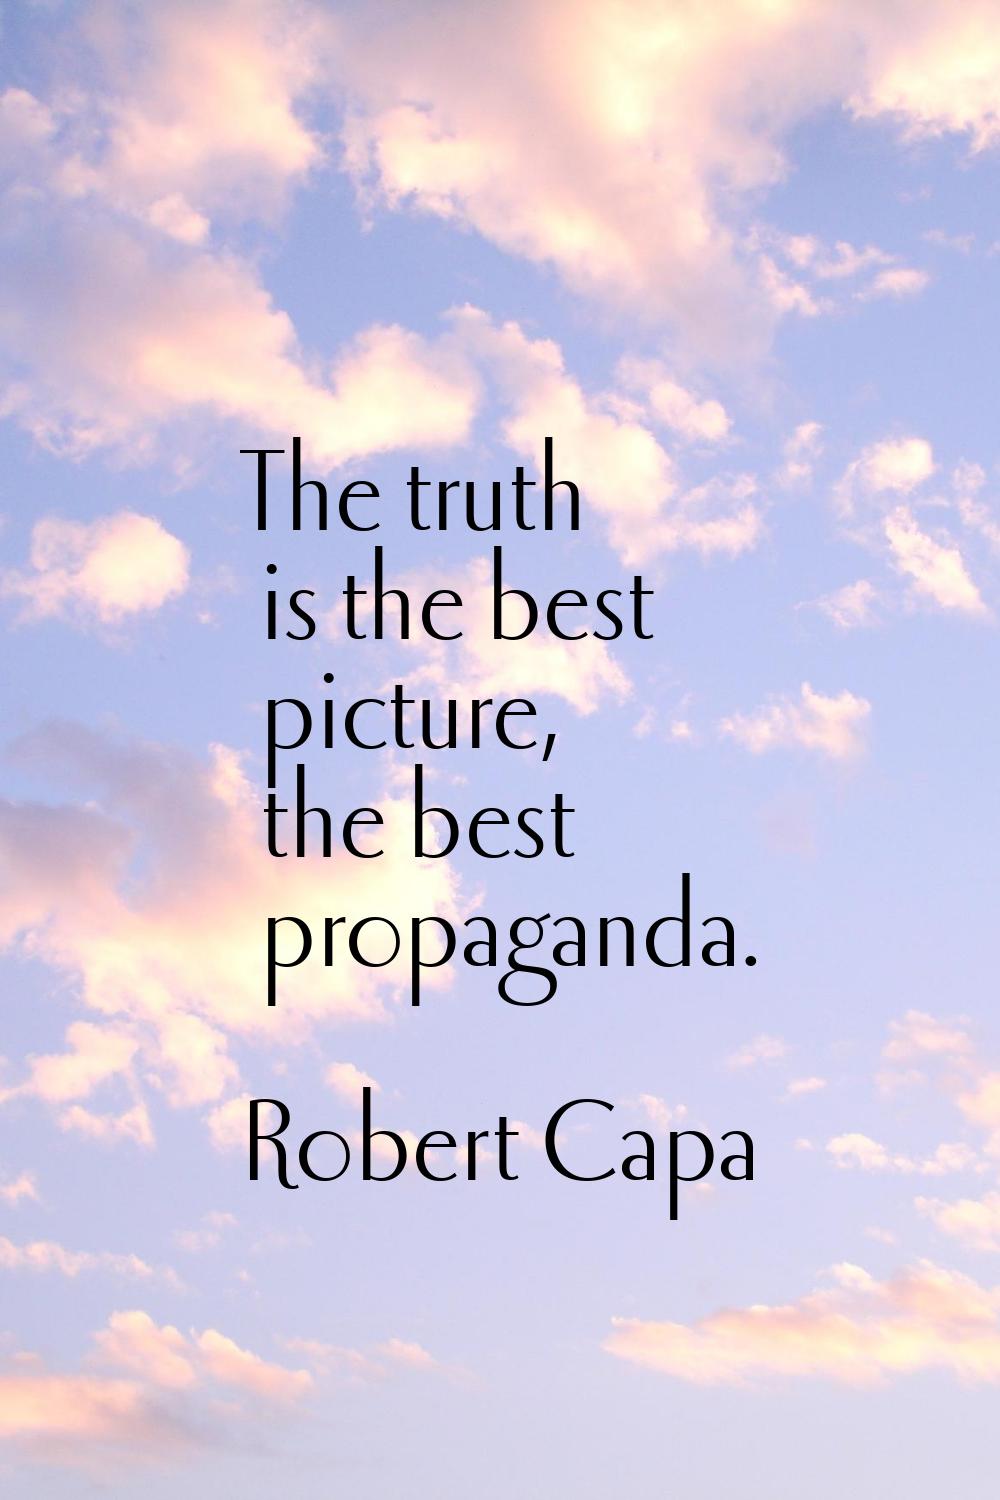 The truth is the best picture, the best propaganda.